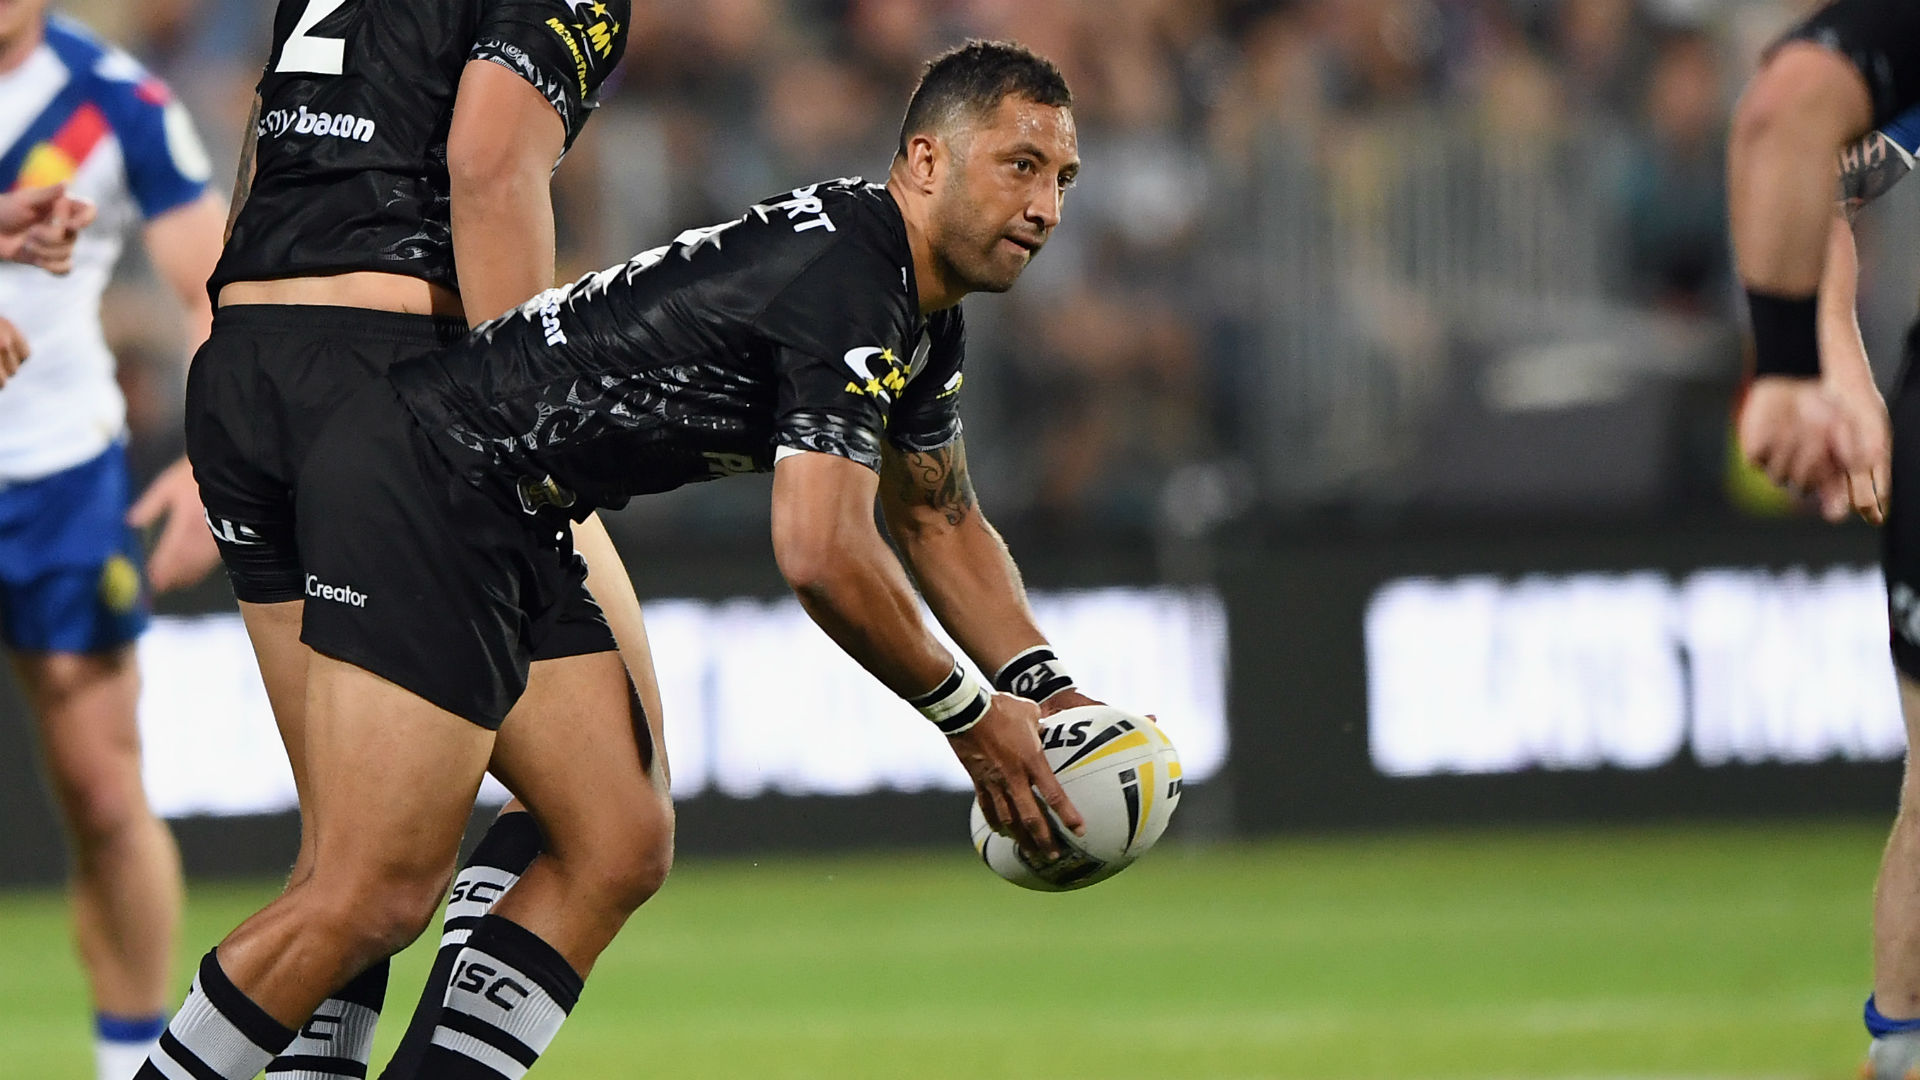 After helping New Zealand to a comfortable win over Great Britain Lions, Kiwis captain Benji Marshall spoke about his international future.